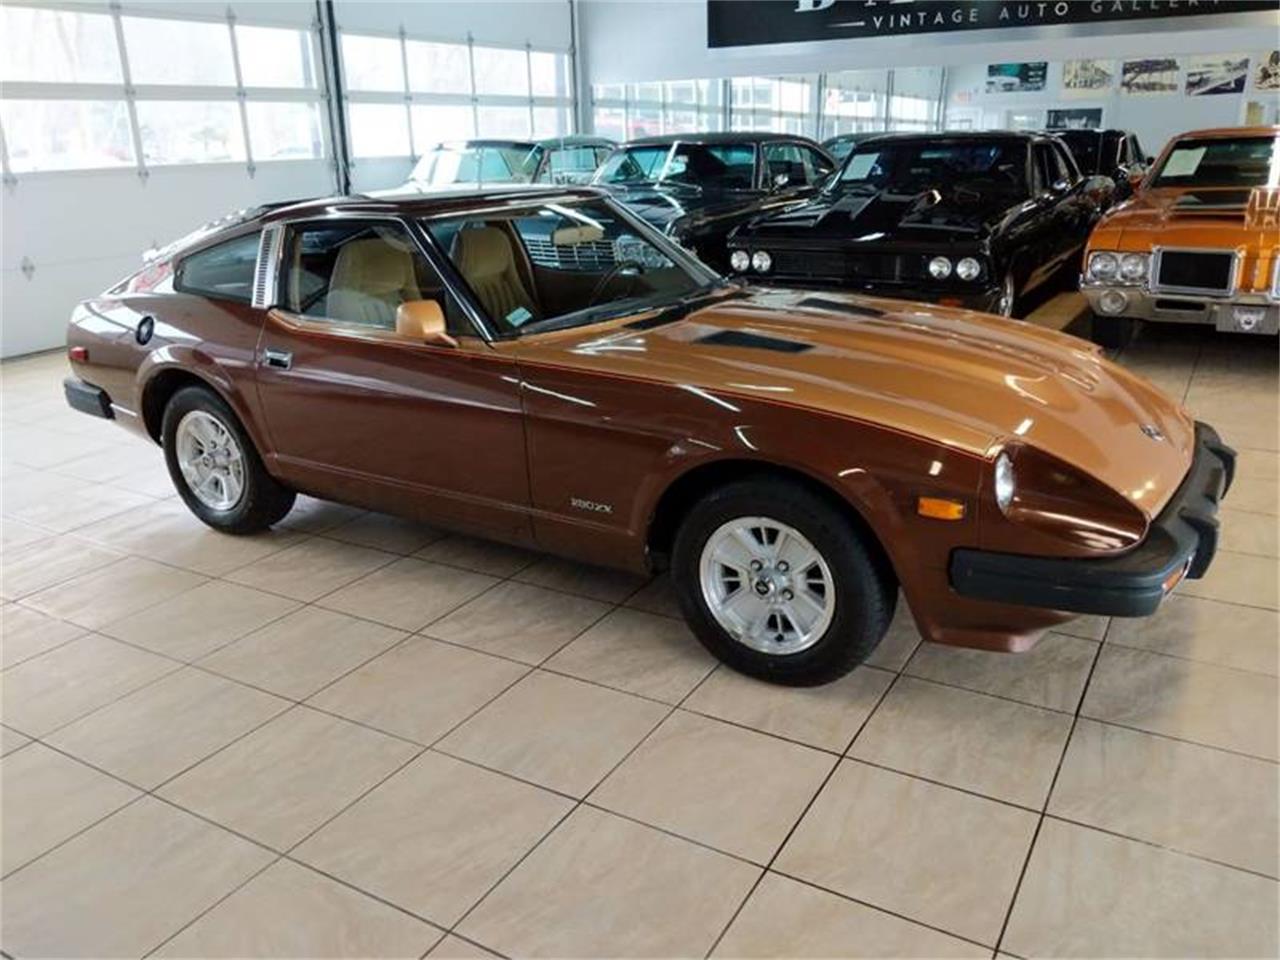 1979 Datsun 280ZX for sale in St. Charles, IL – photo 81